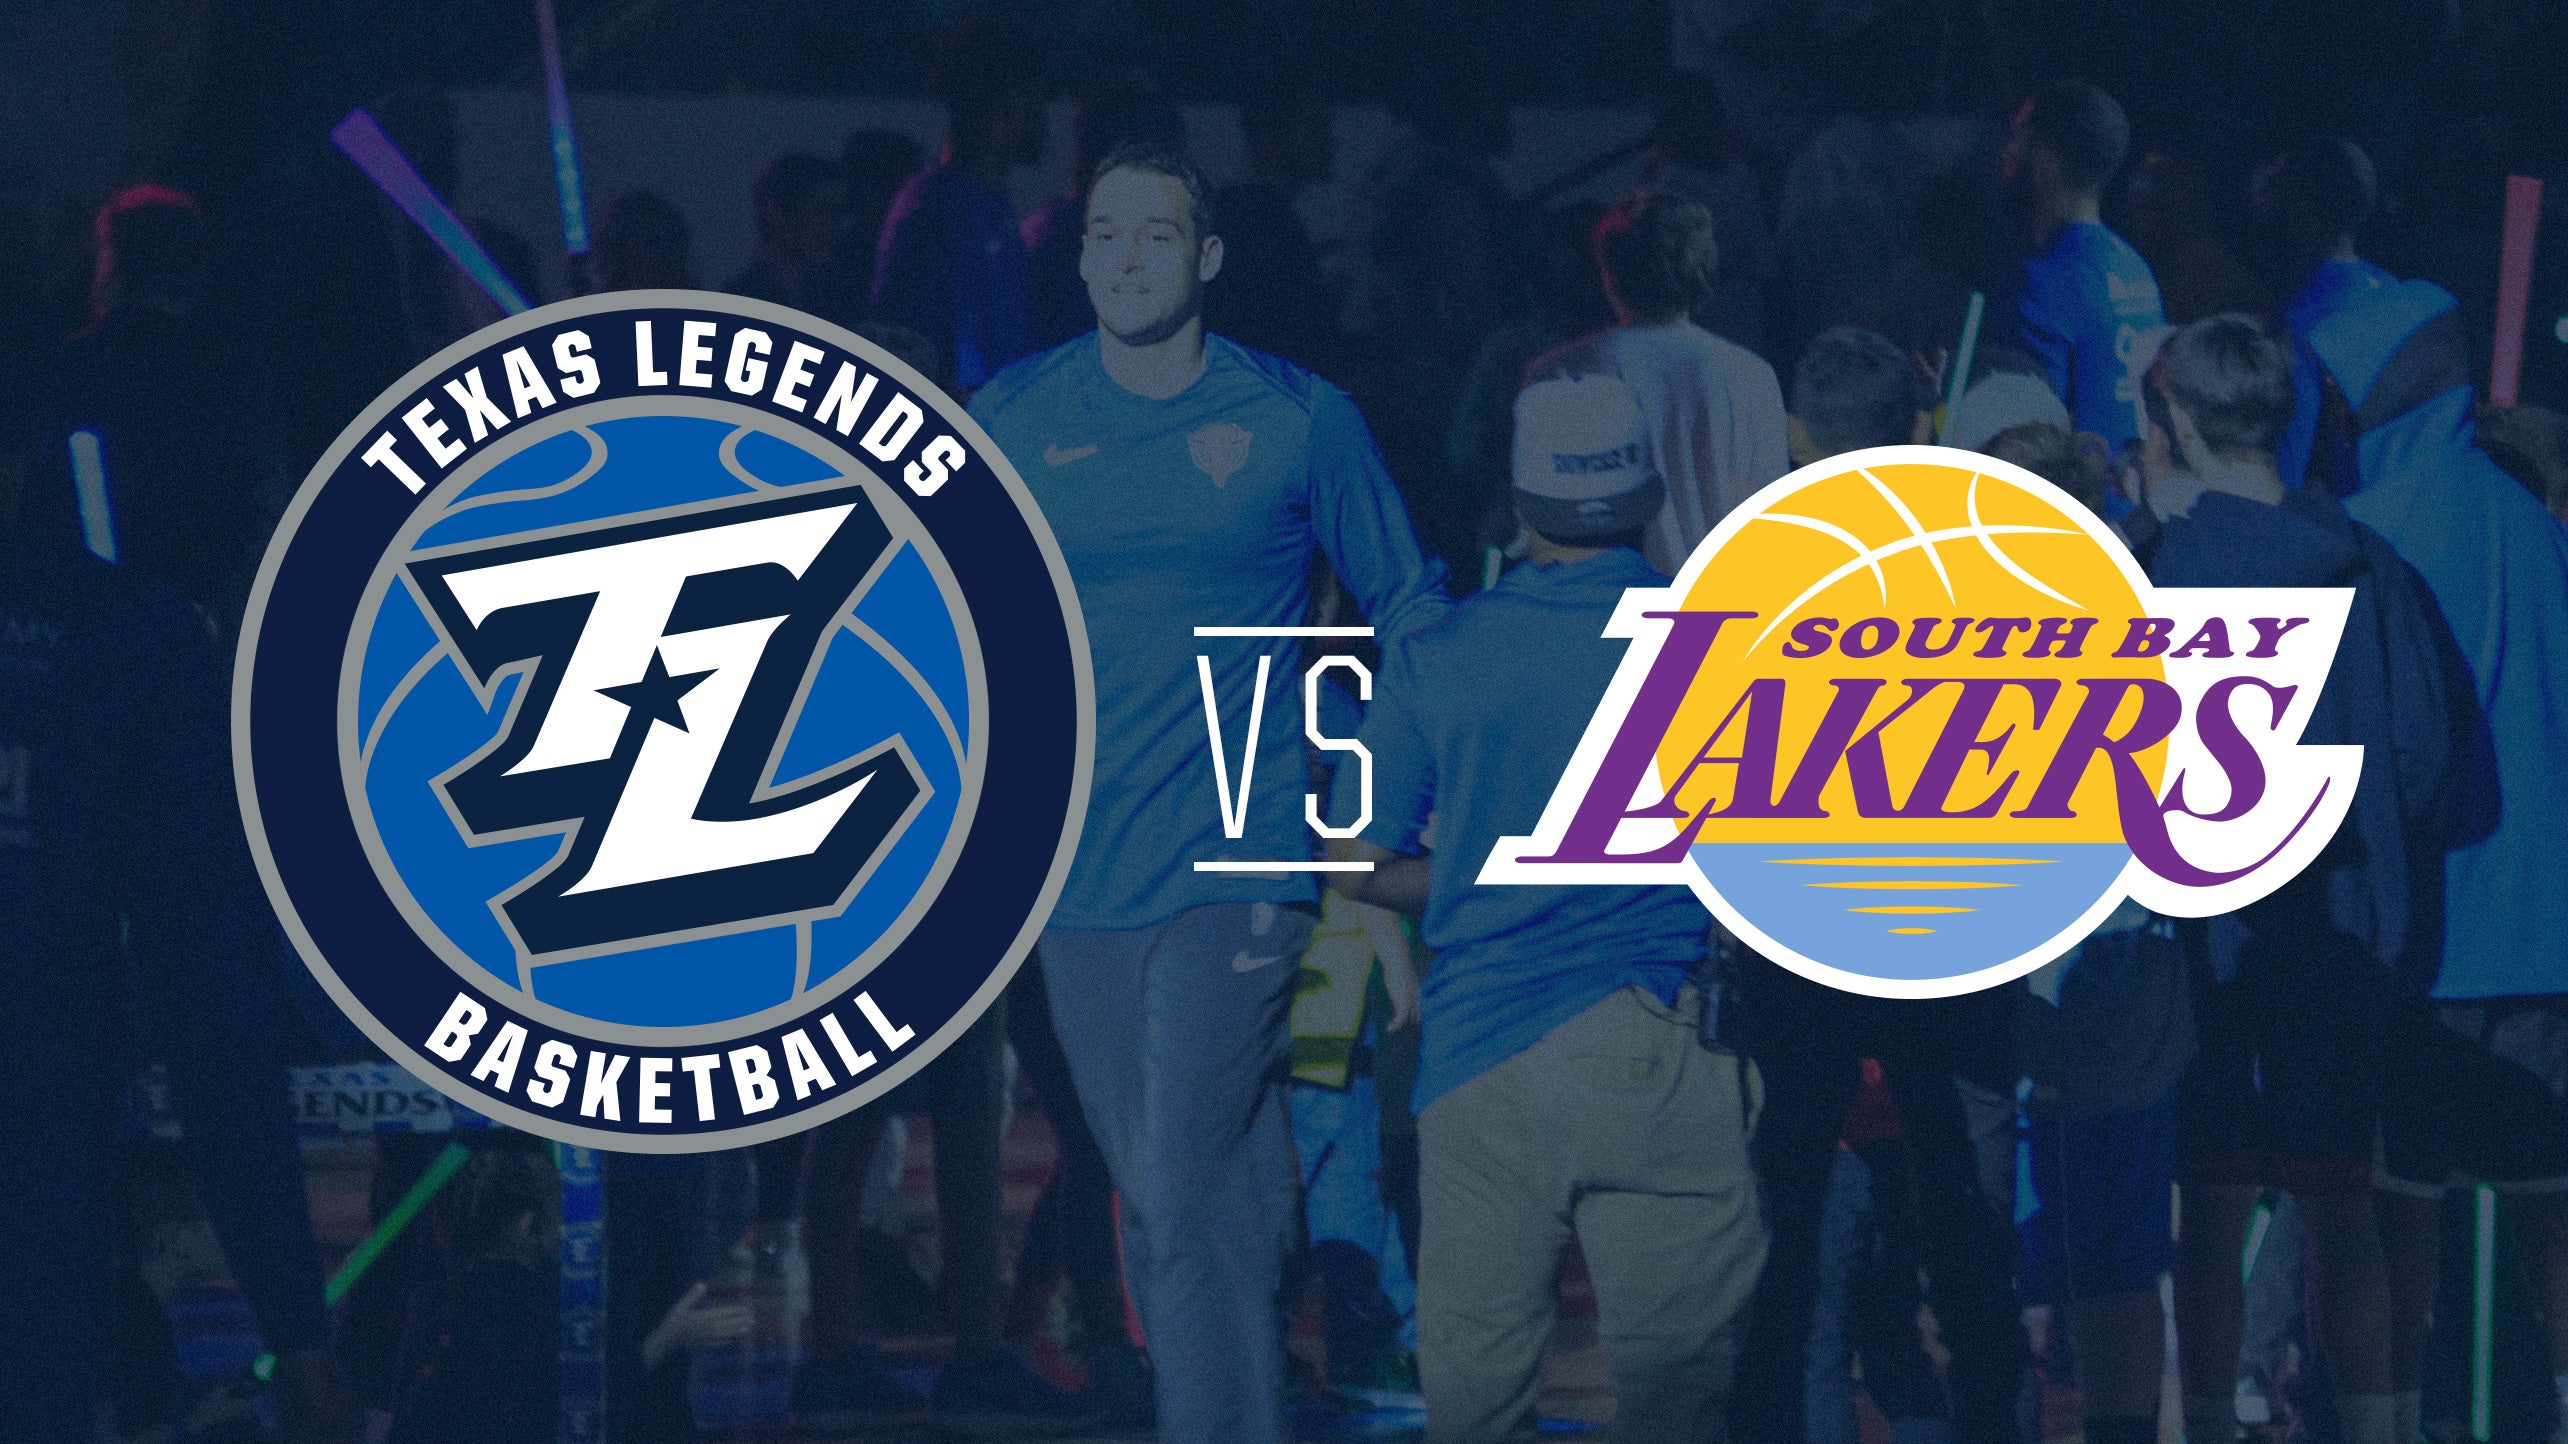 Texas Legends vs South Bay Lakers